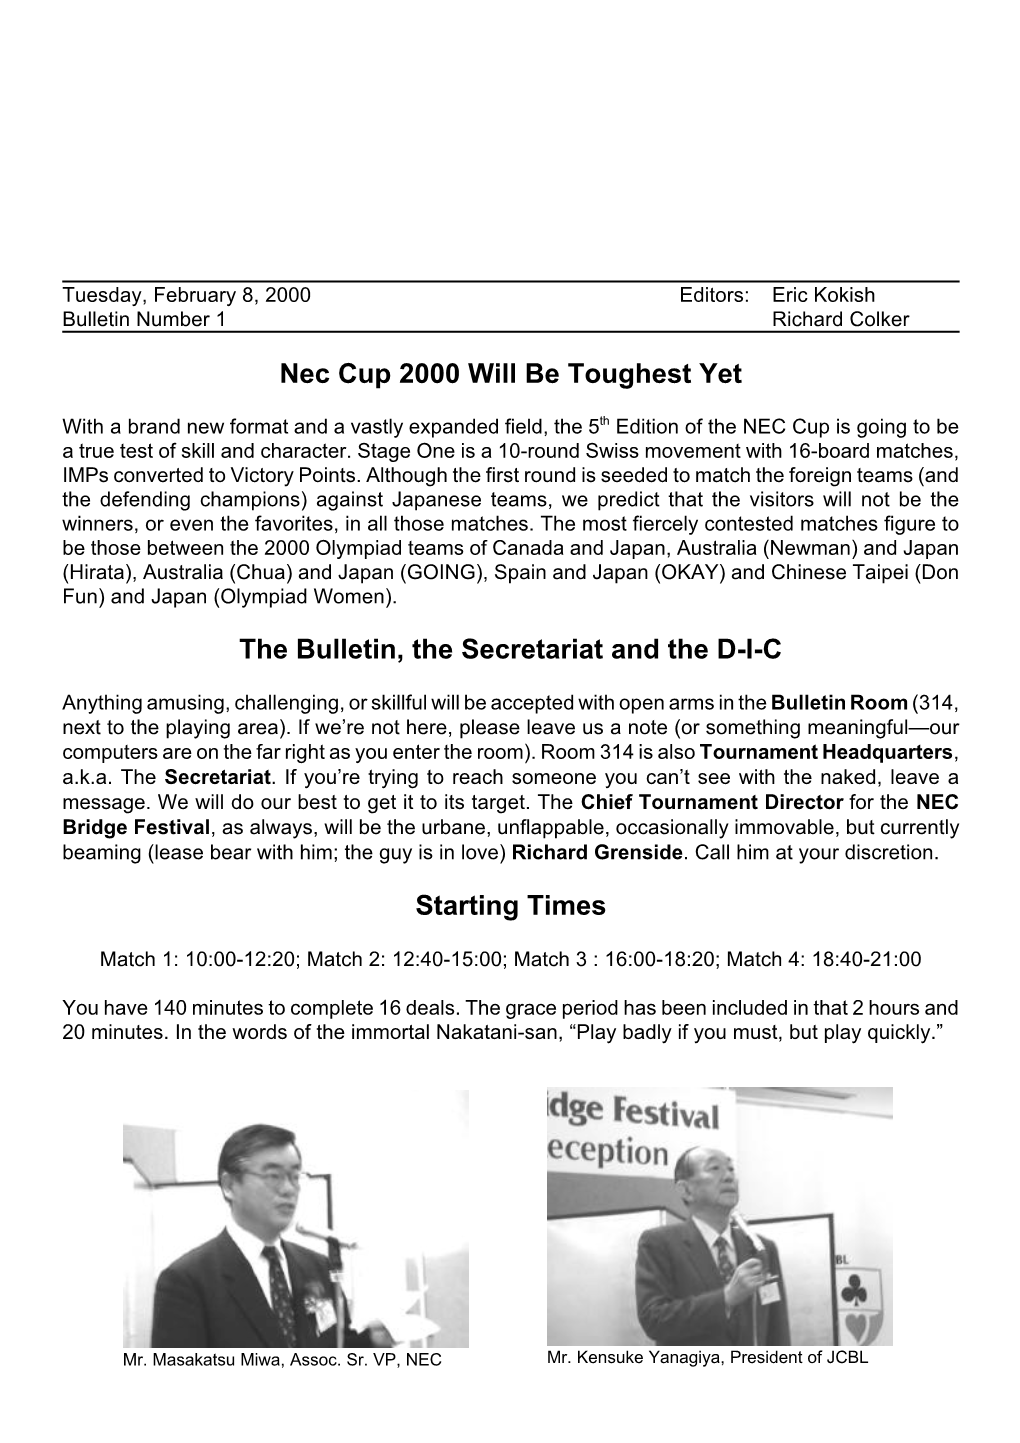 Nec Cup 2000 Will Be Toughest Yet the Bulletin, the Secretariat and The